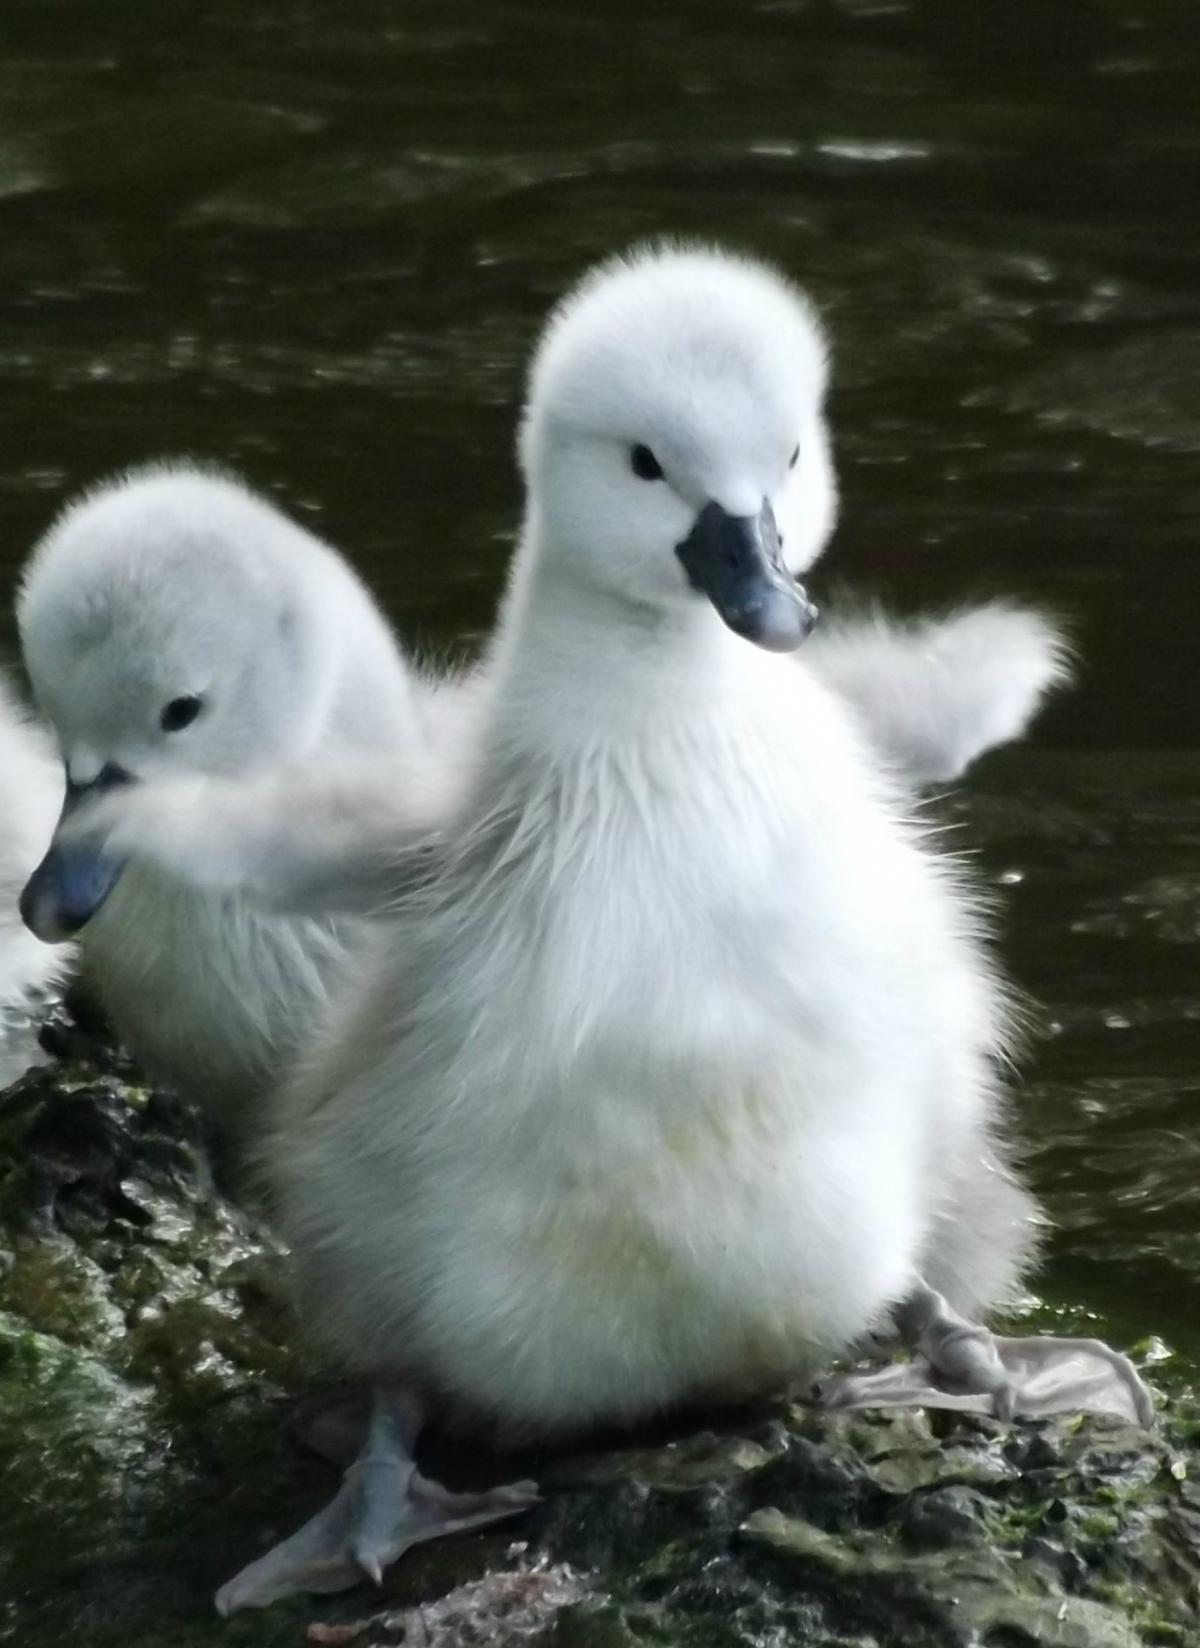 A one day old cygnet at Lymm Dam, pictured by Gillian Baker of Sale